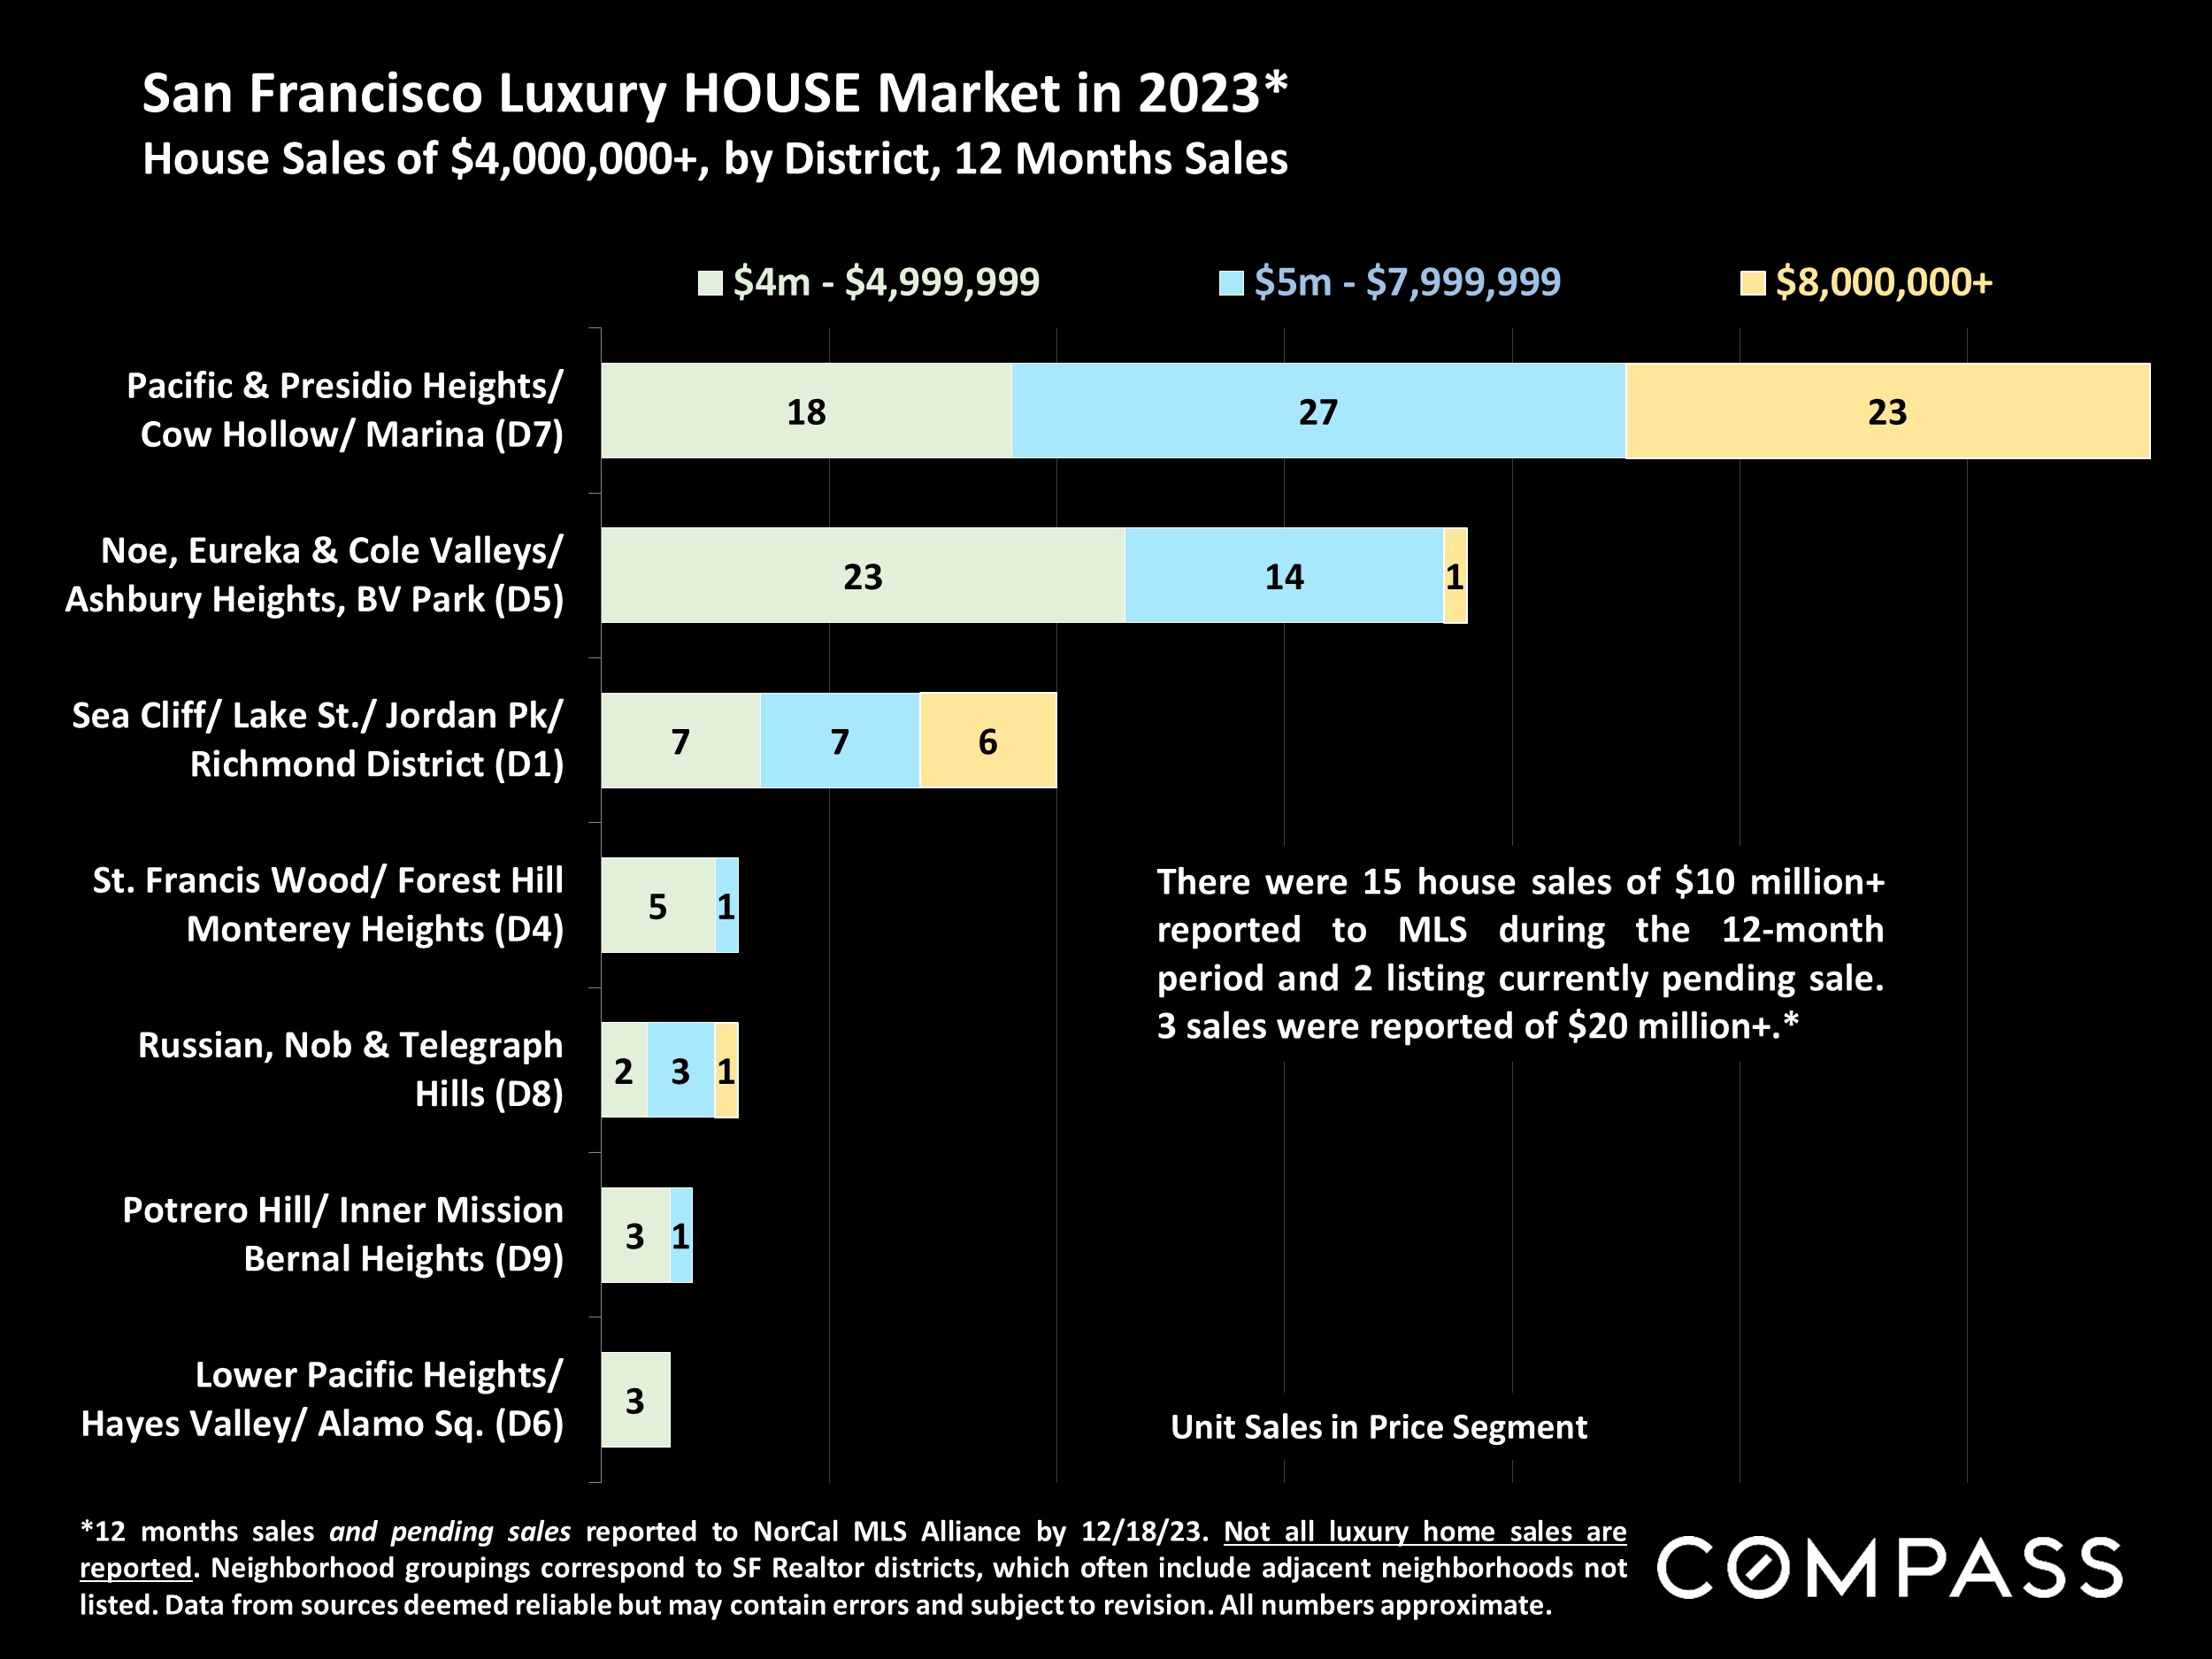 San Francisco Luxury HOUSE Market in 2023* House Sales of $4,000,000+, by District, 12 Months Sales